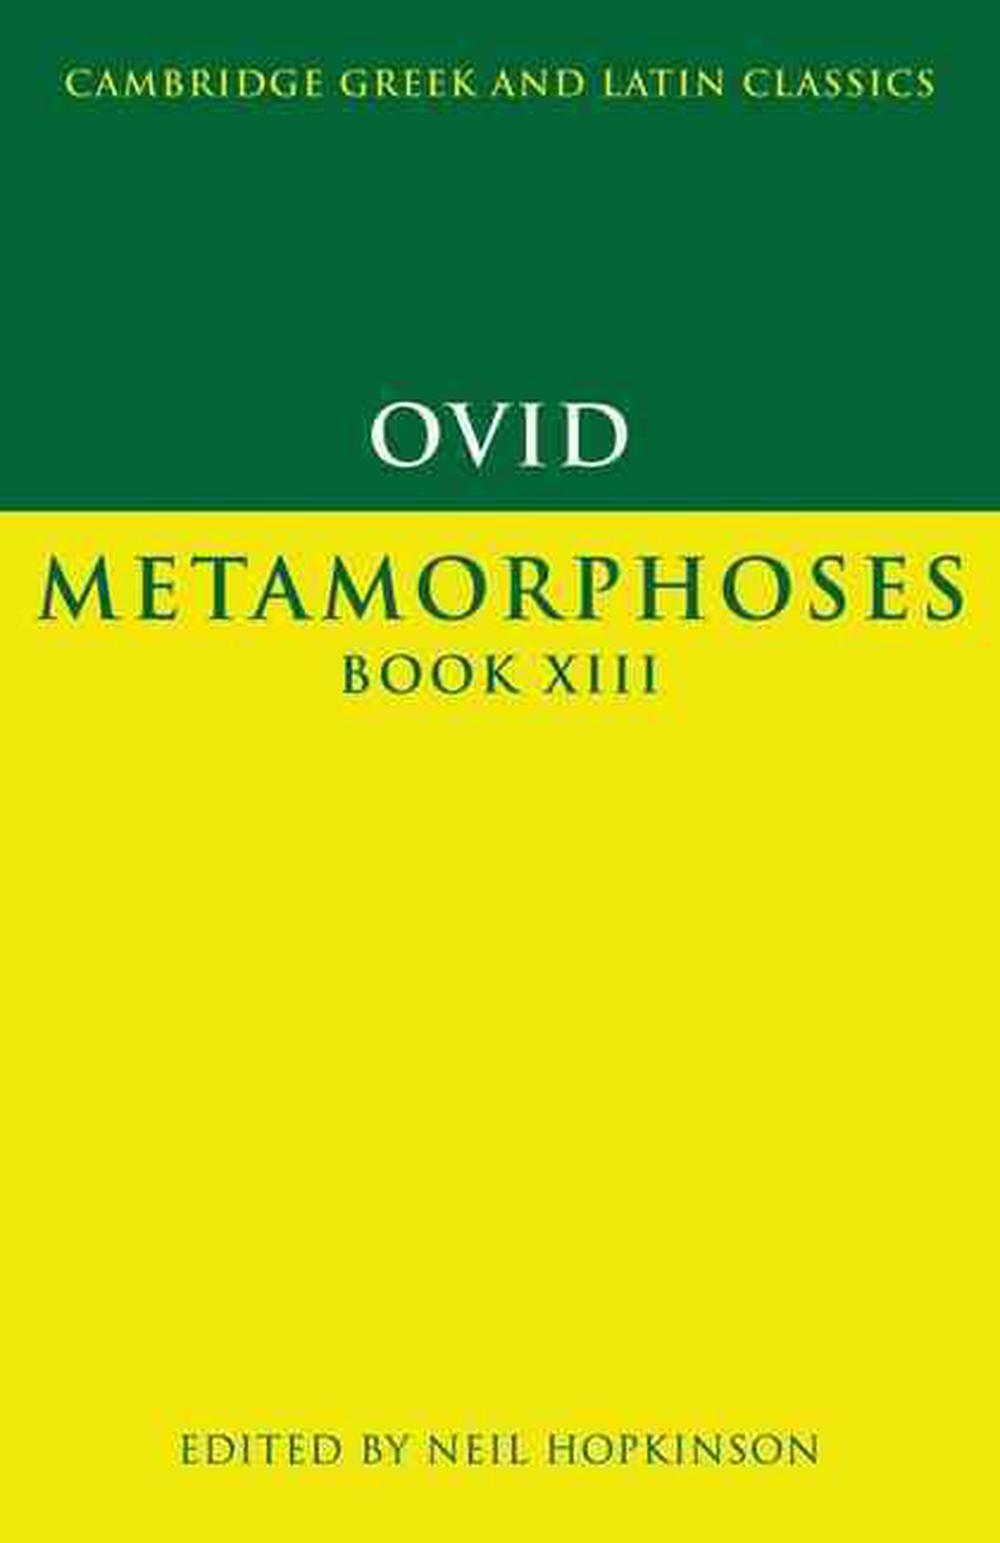 Ovid Metamorphoses Book XIII by Ovid (Latin) Paperback Book Free